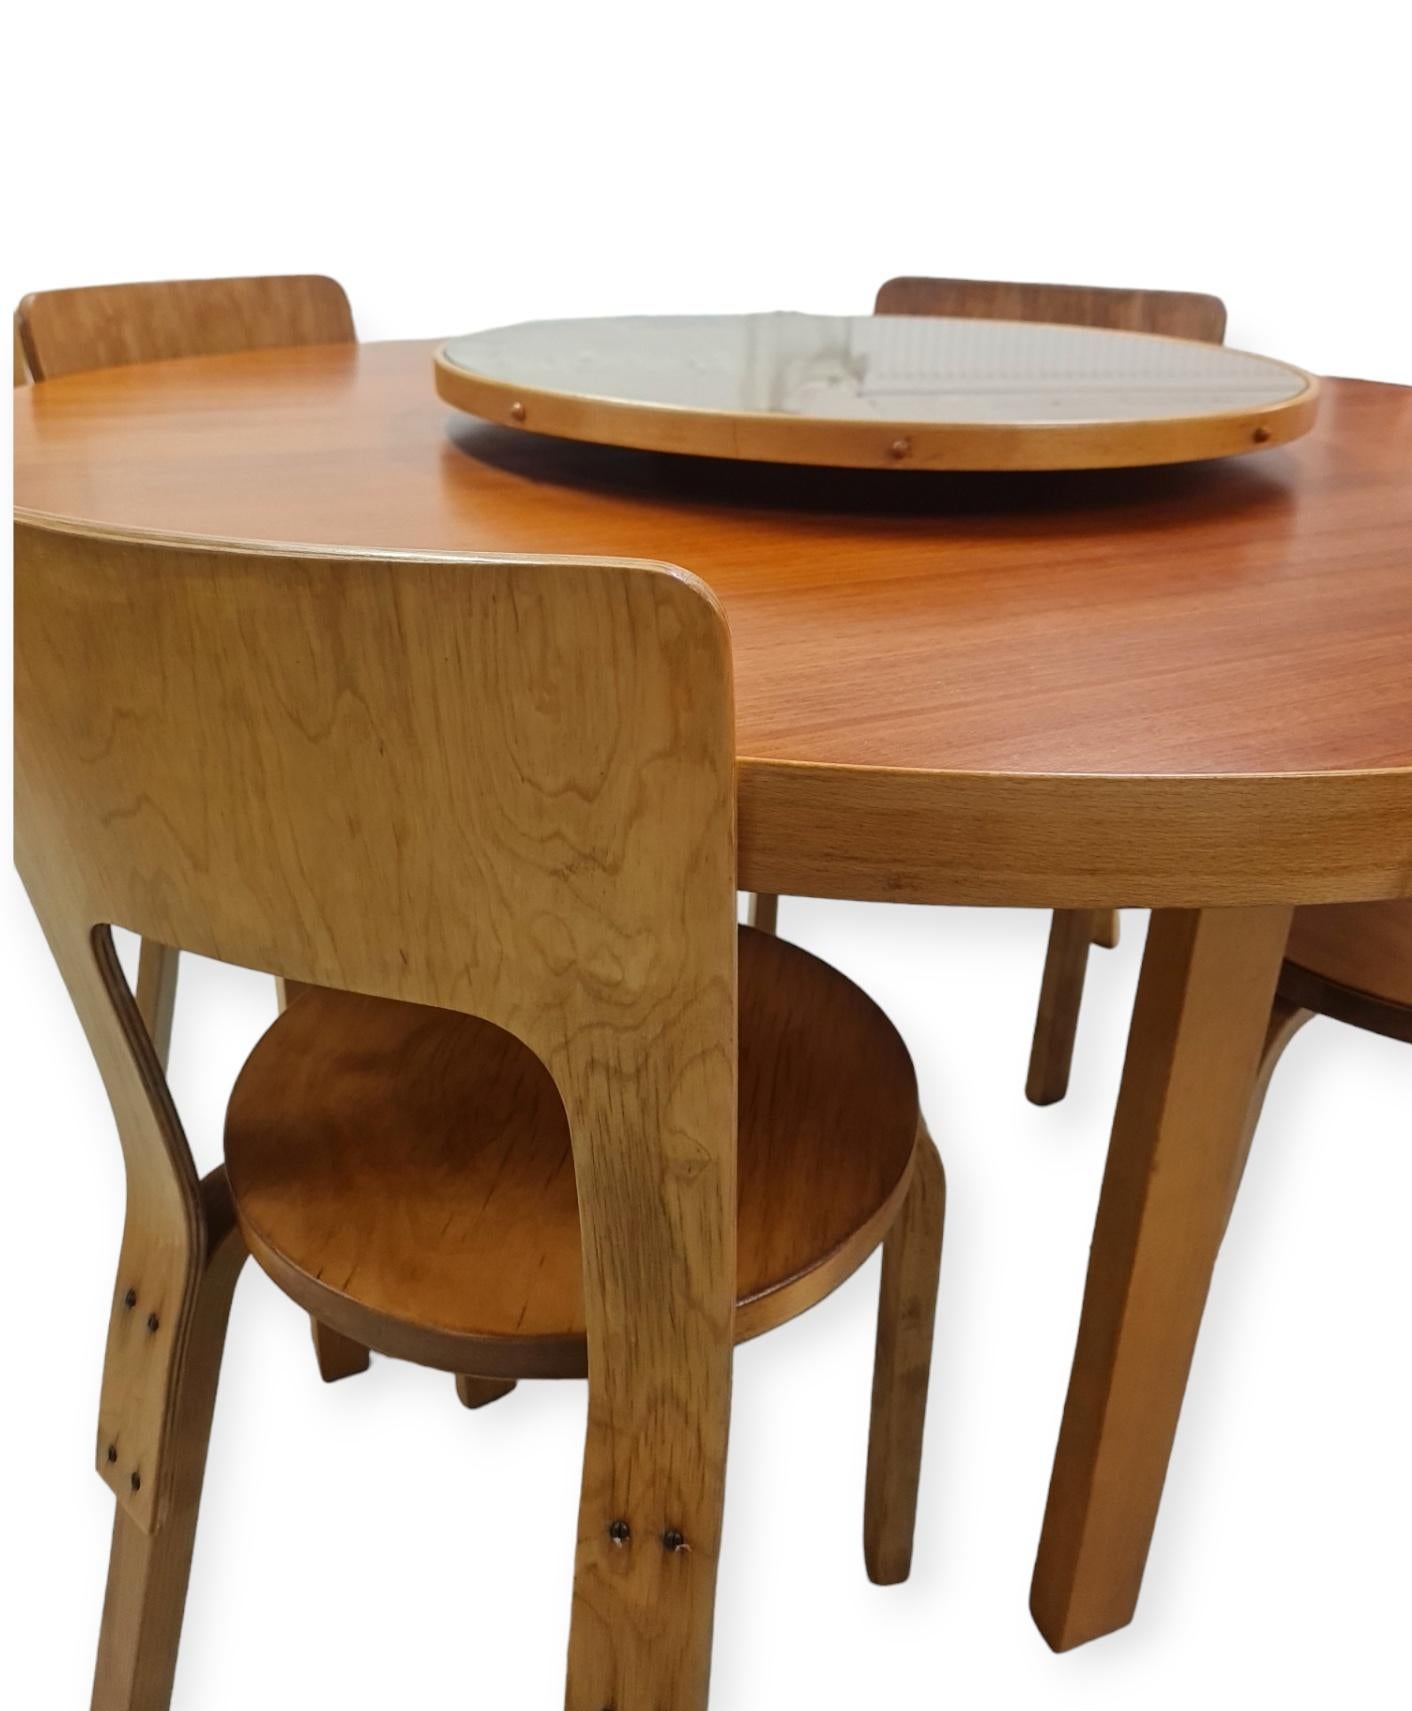 Alvar Aalto Dining Set with Lazy Susan and 6 Model 66 chairs, 1940s For Sale 3